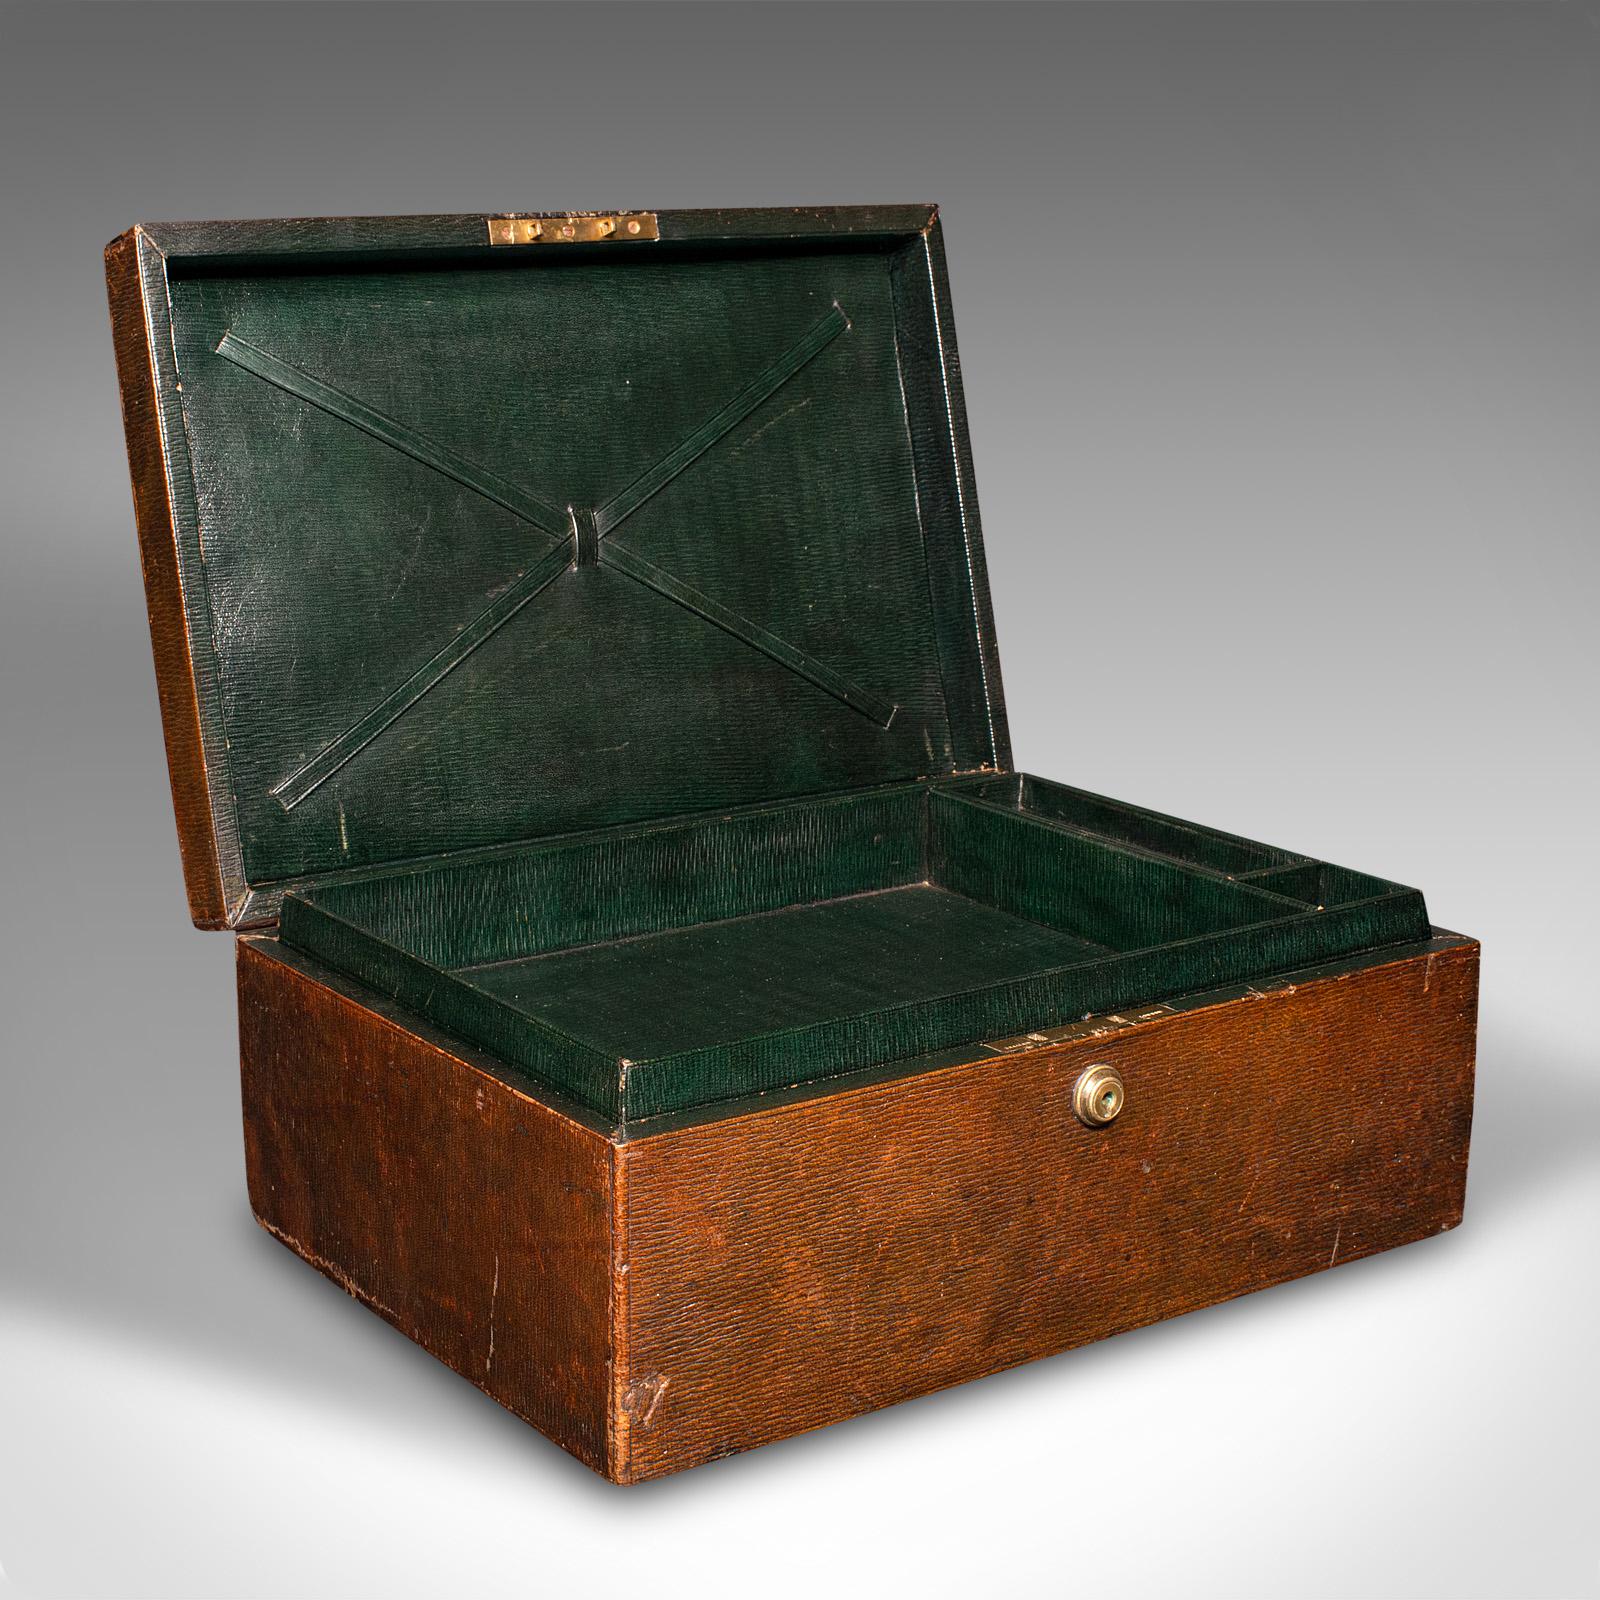 This is an antique correspondence box. An English, aged leather travelling writing case in the manner of Asprey, dating to the mid Victorian period, circa 1860.

Appealing Victorian leather writing box, with fascinating colour
Displays a desirable